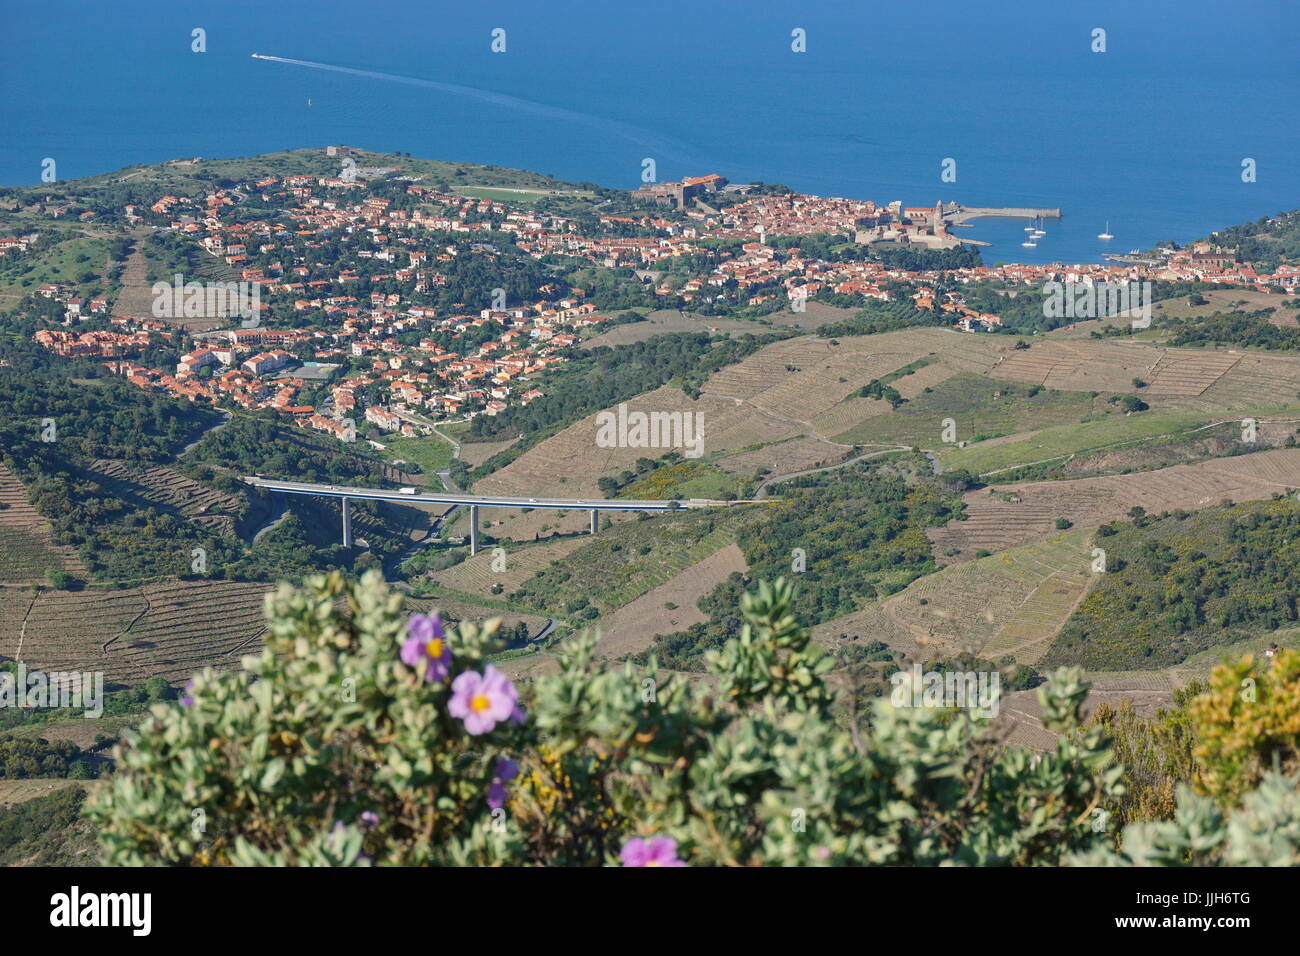 Landscape of the coastal village of Collioure with vineyards fields and the Mediterranean sea, south of France, Roussillon, Pyrenees Orientales Stock Photo